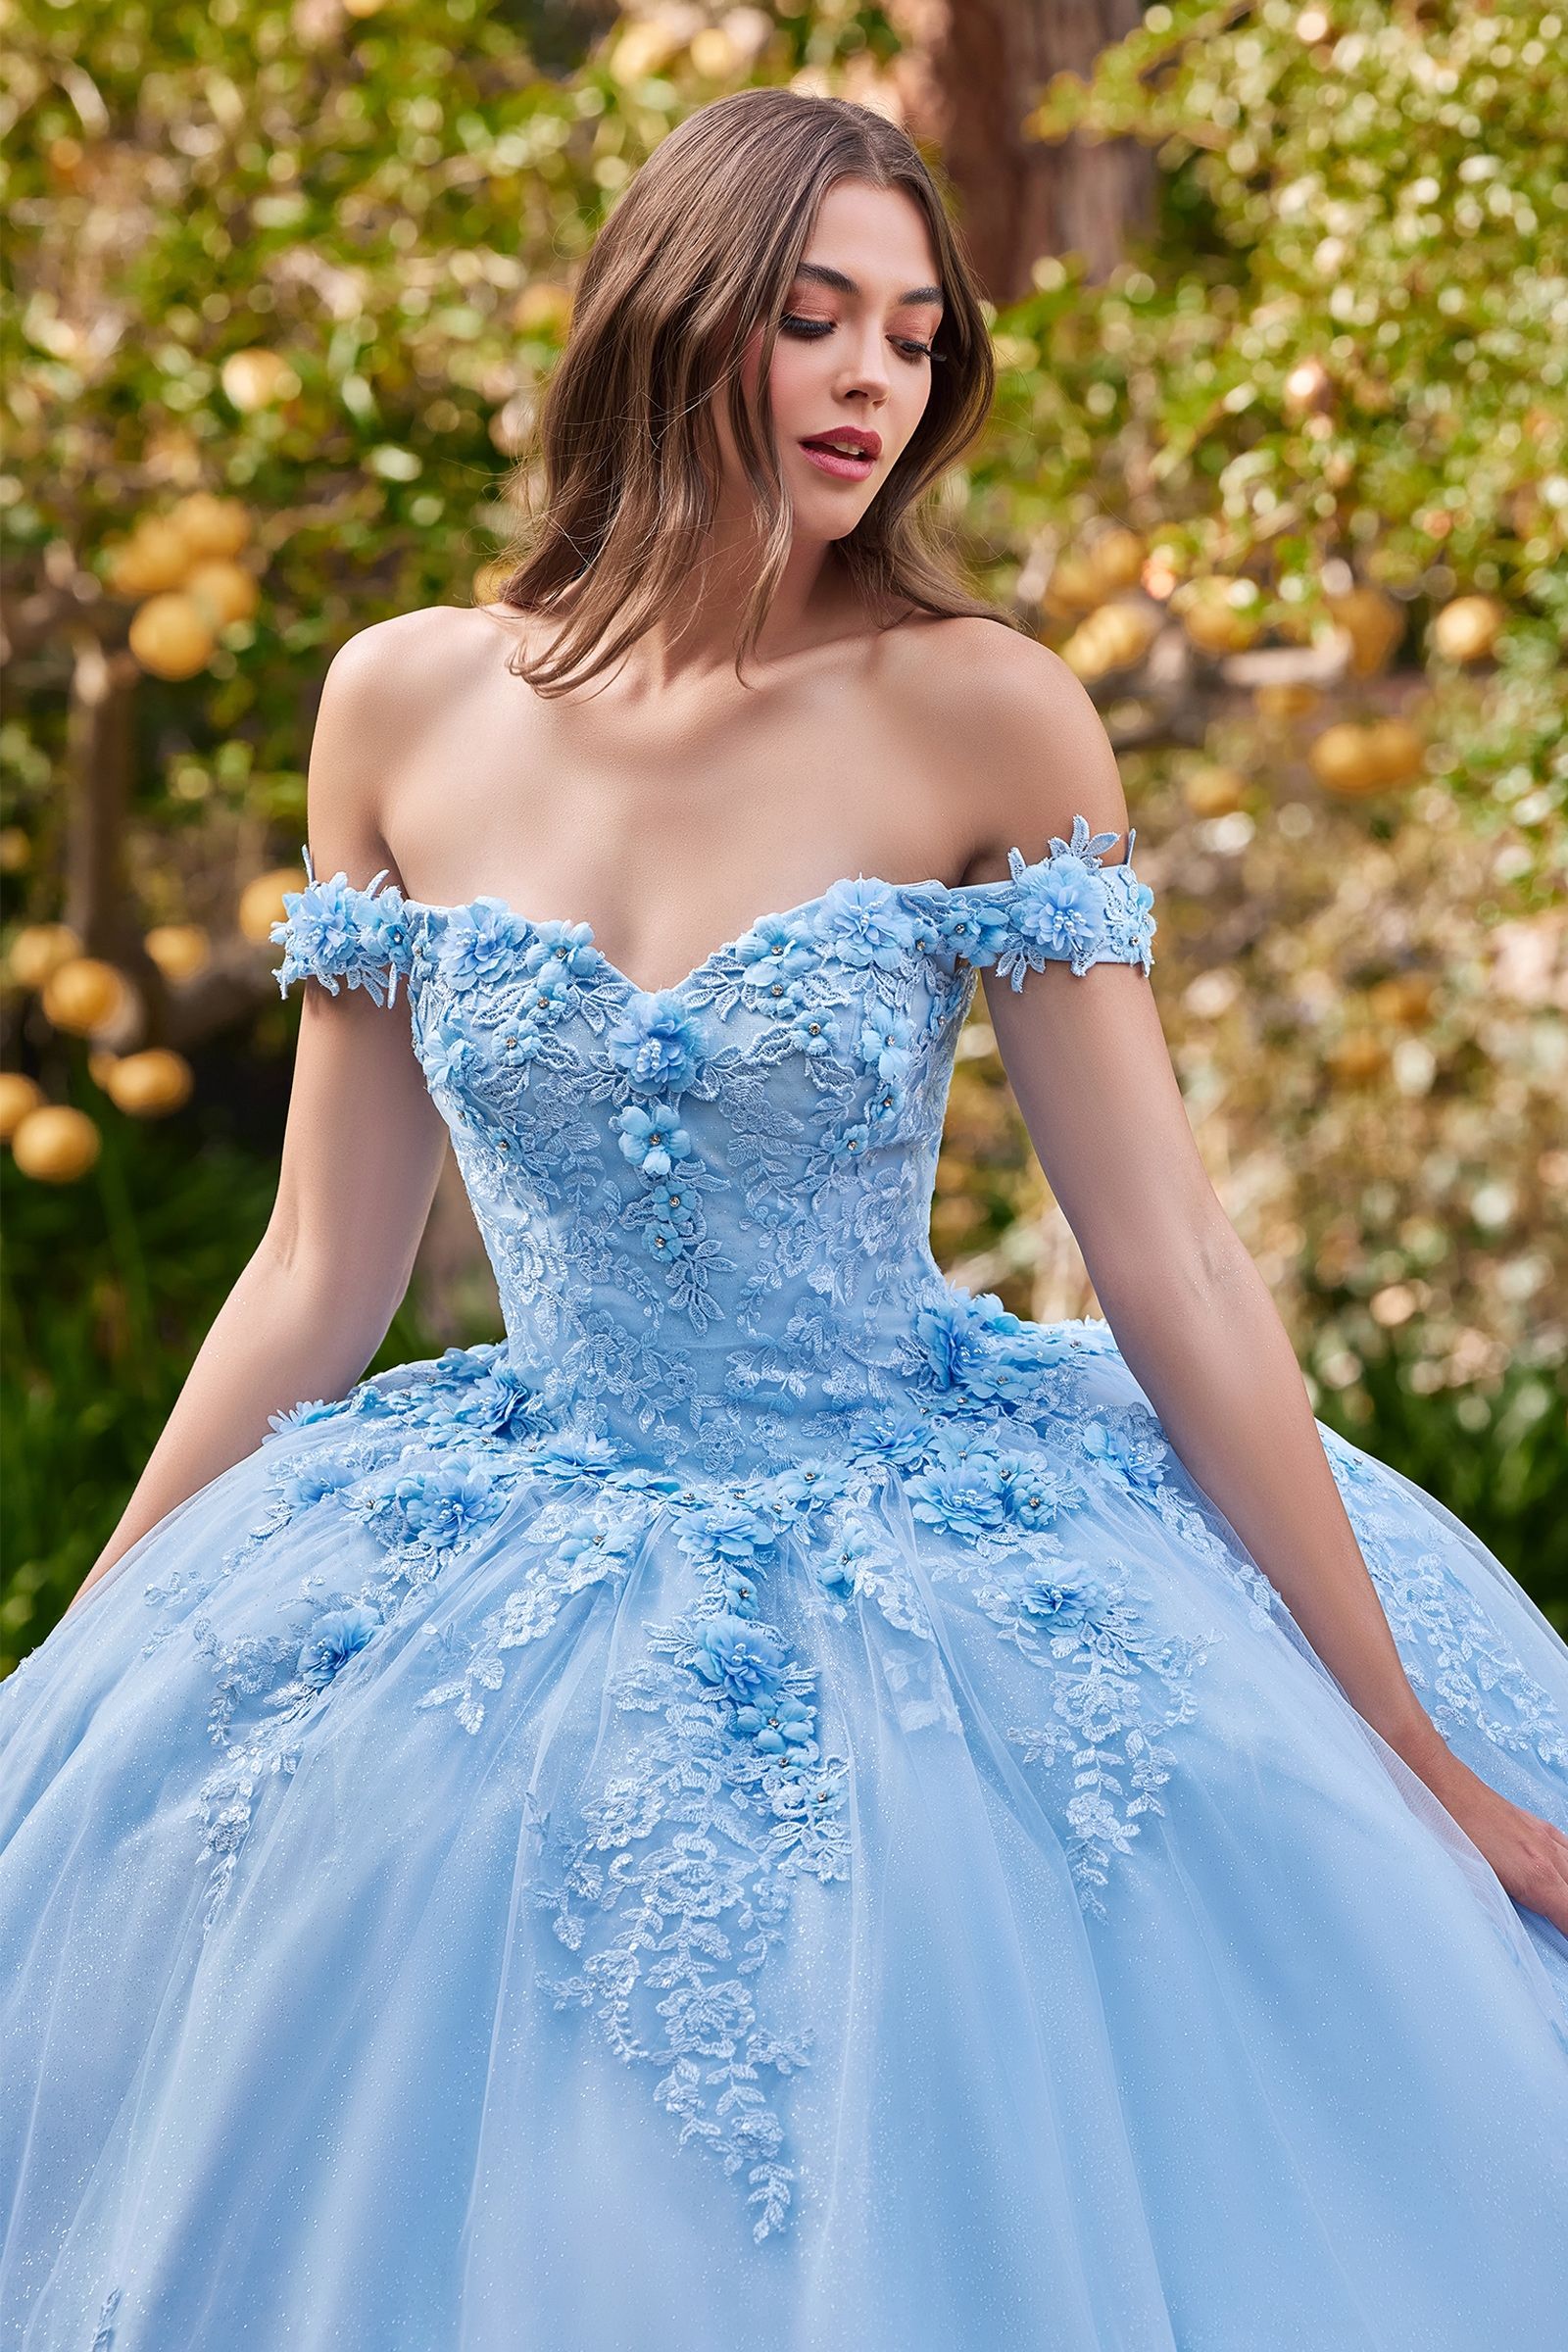 Unleash your inner princess with this Ladivine 15702 Off The Shoulder Shimmer Lace Quinceanera Ballgown Dress Formal Gown! Flaunt your radiant beauty in this romantic, glittery tulle ball gown, featuring a sweetheart neckline and off-shoulder lace and floral appliques. The gorgeous layered skirt sparkles magnificently with floral appliques, and the lace-up corset back closure ensures a perfectly tailored fit. Get ready to look like the belle of the ball!